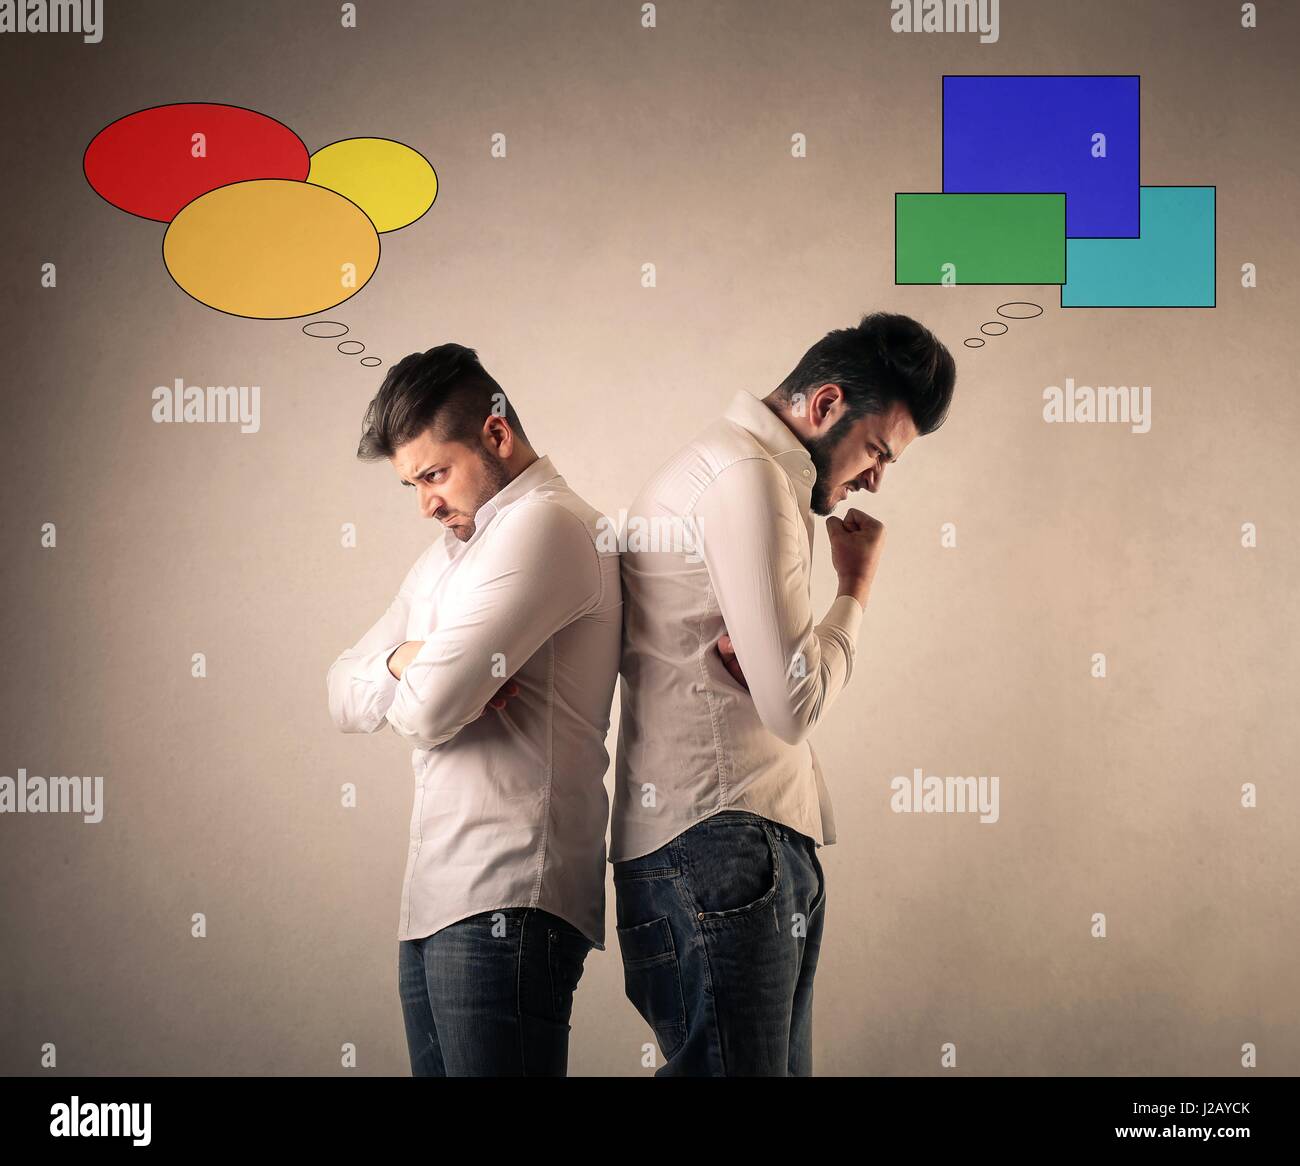 Men Thinking Differently And Being Mad At Each Other Stock Photo